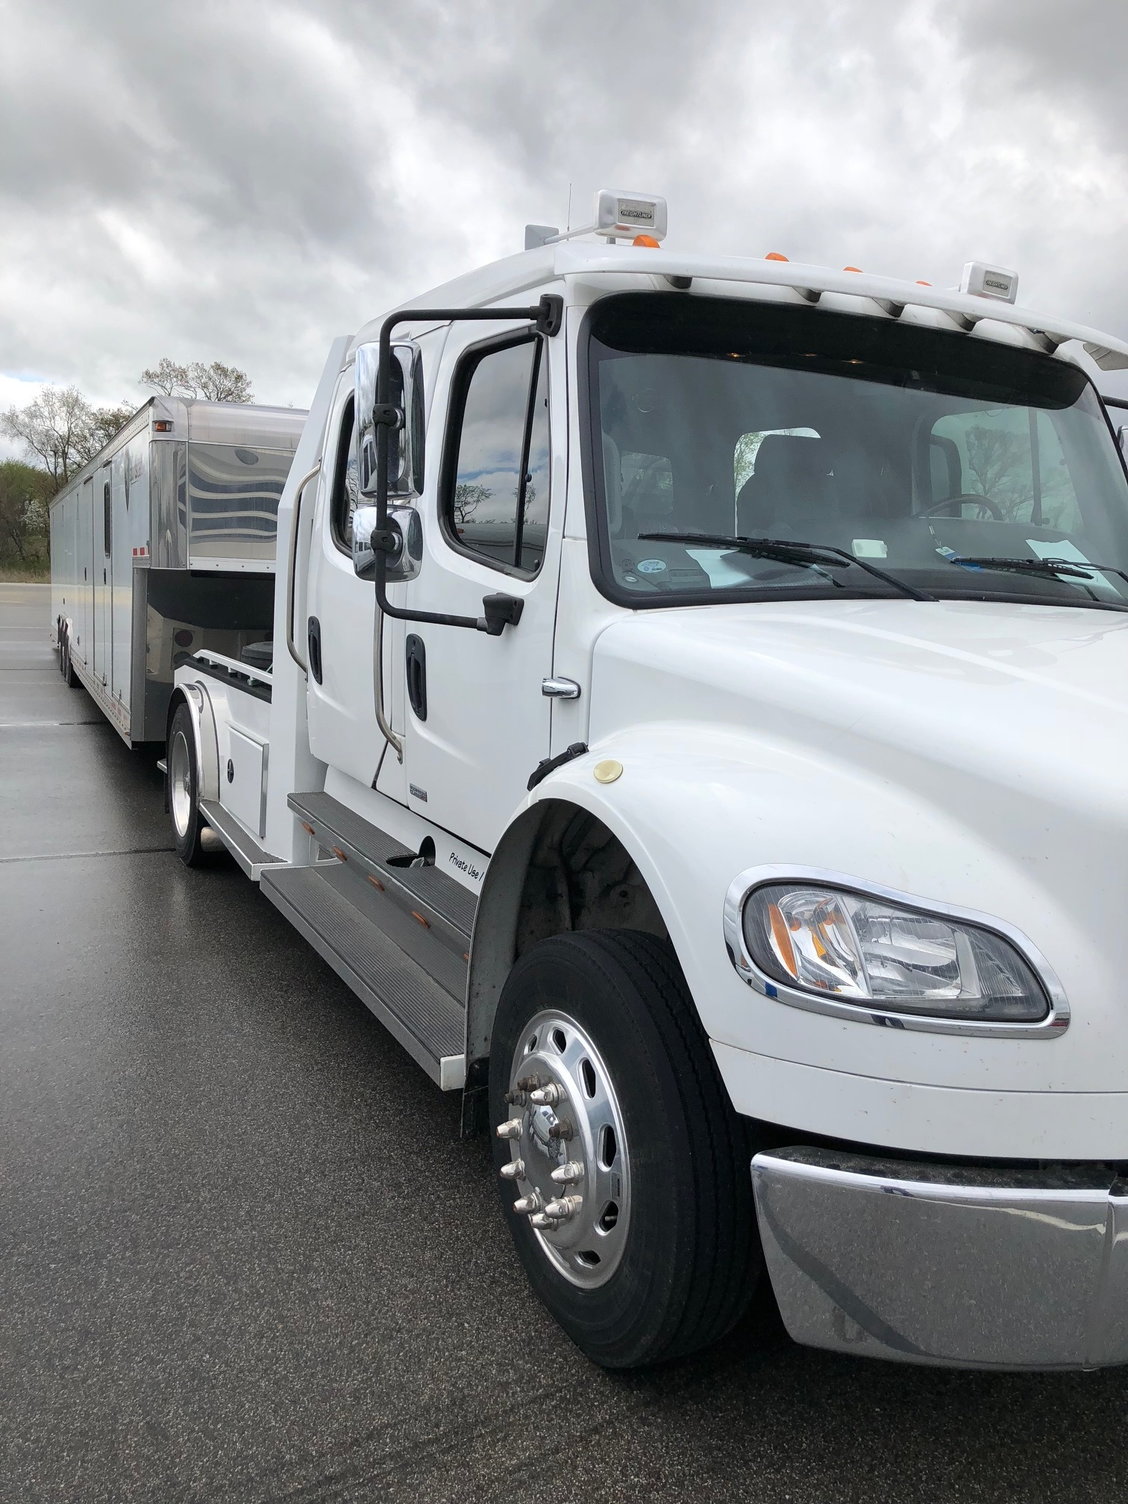 2007 Porsche 911 - 2007 Freightliner Sports Chasis M2 (Toy Hauler) - Used - VIN 1FVACVDC87HY20971 - 4WD - Automatic - Truck - White - Louisville, KY 40210, United States